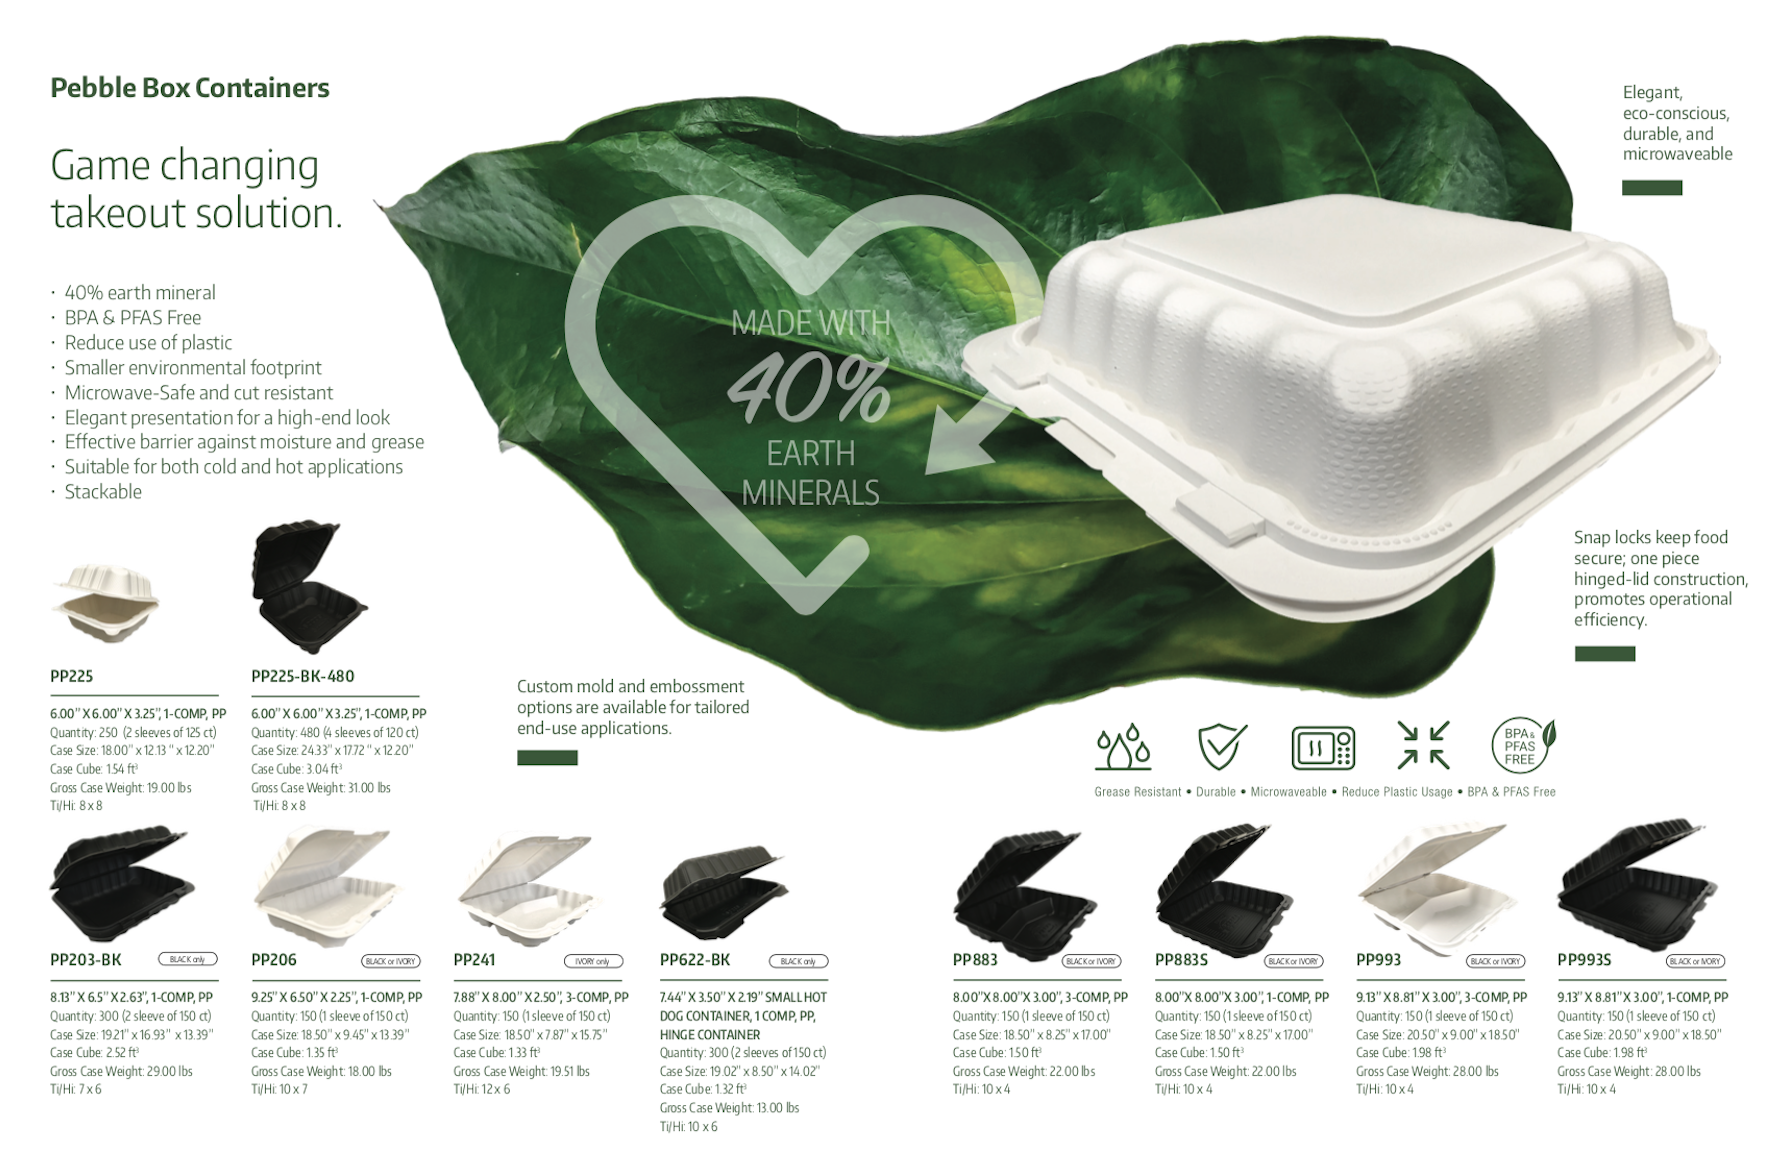 Brochure spread design featuring Ecopax Pebble environmental friendly takeout containers